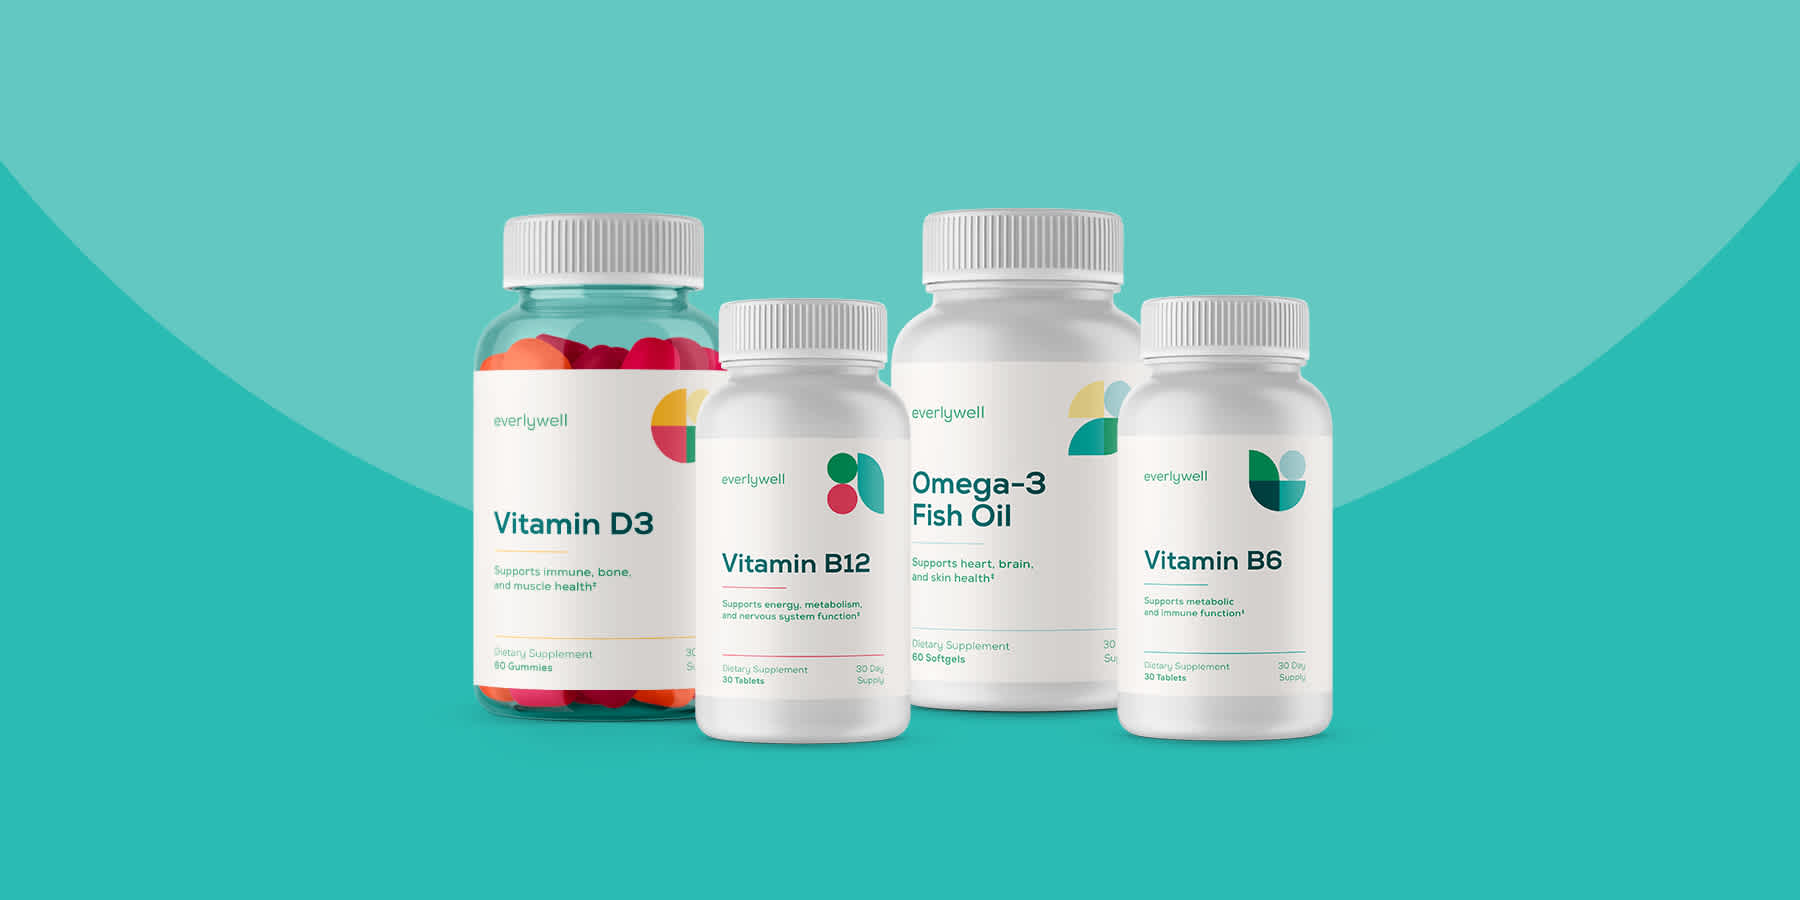 Everlywell Vitamins and Supplements bottles